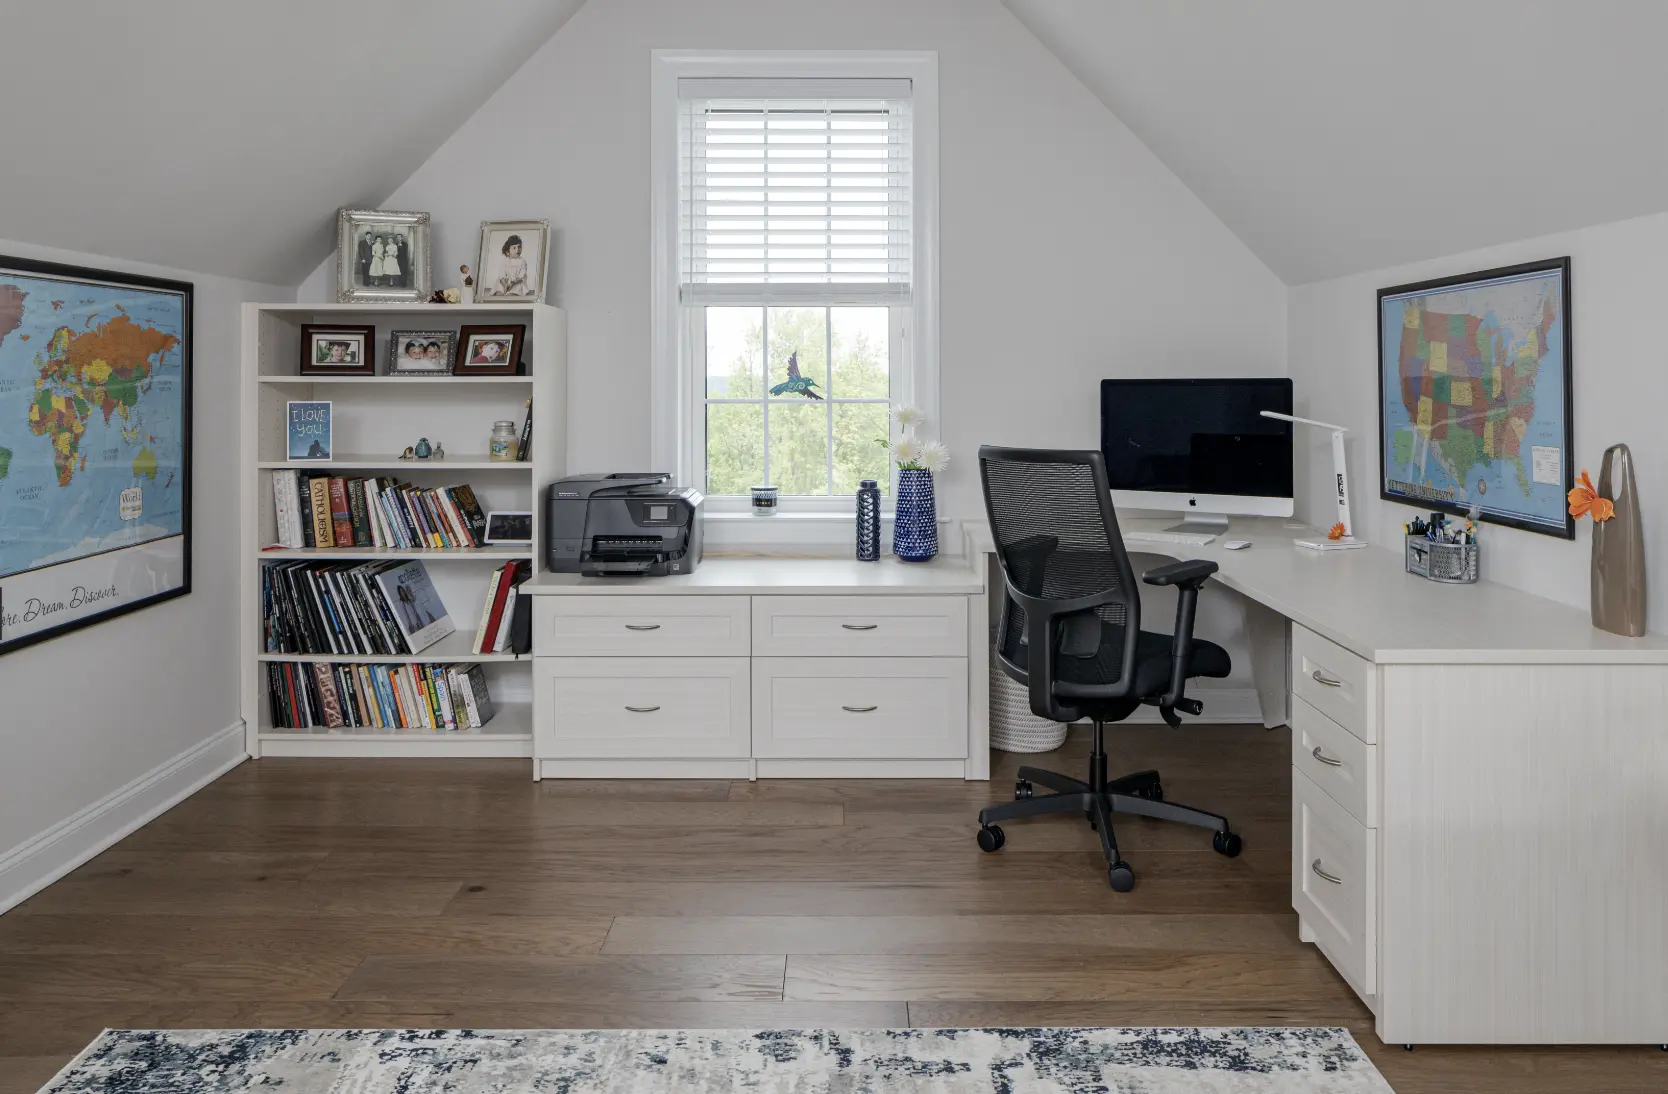 Home office finished with white cabinets in attic room with low ceilings